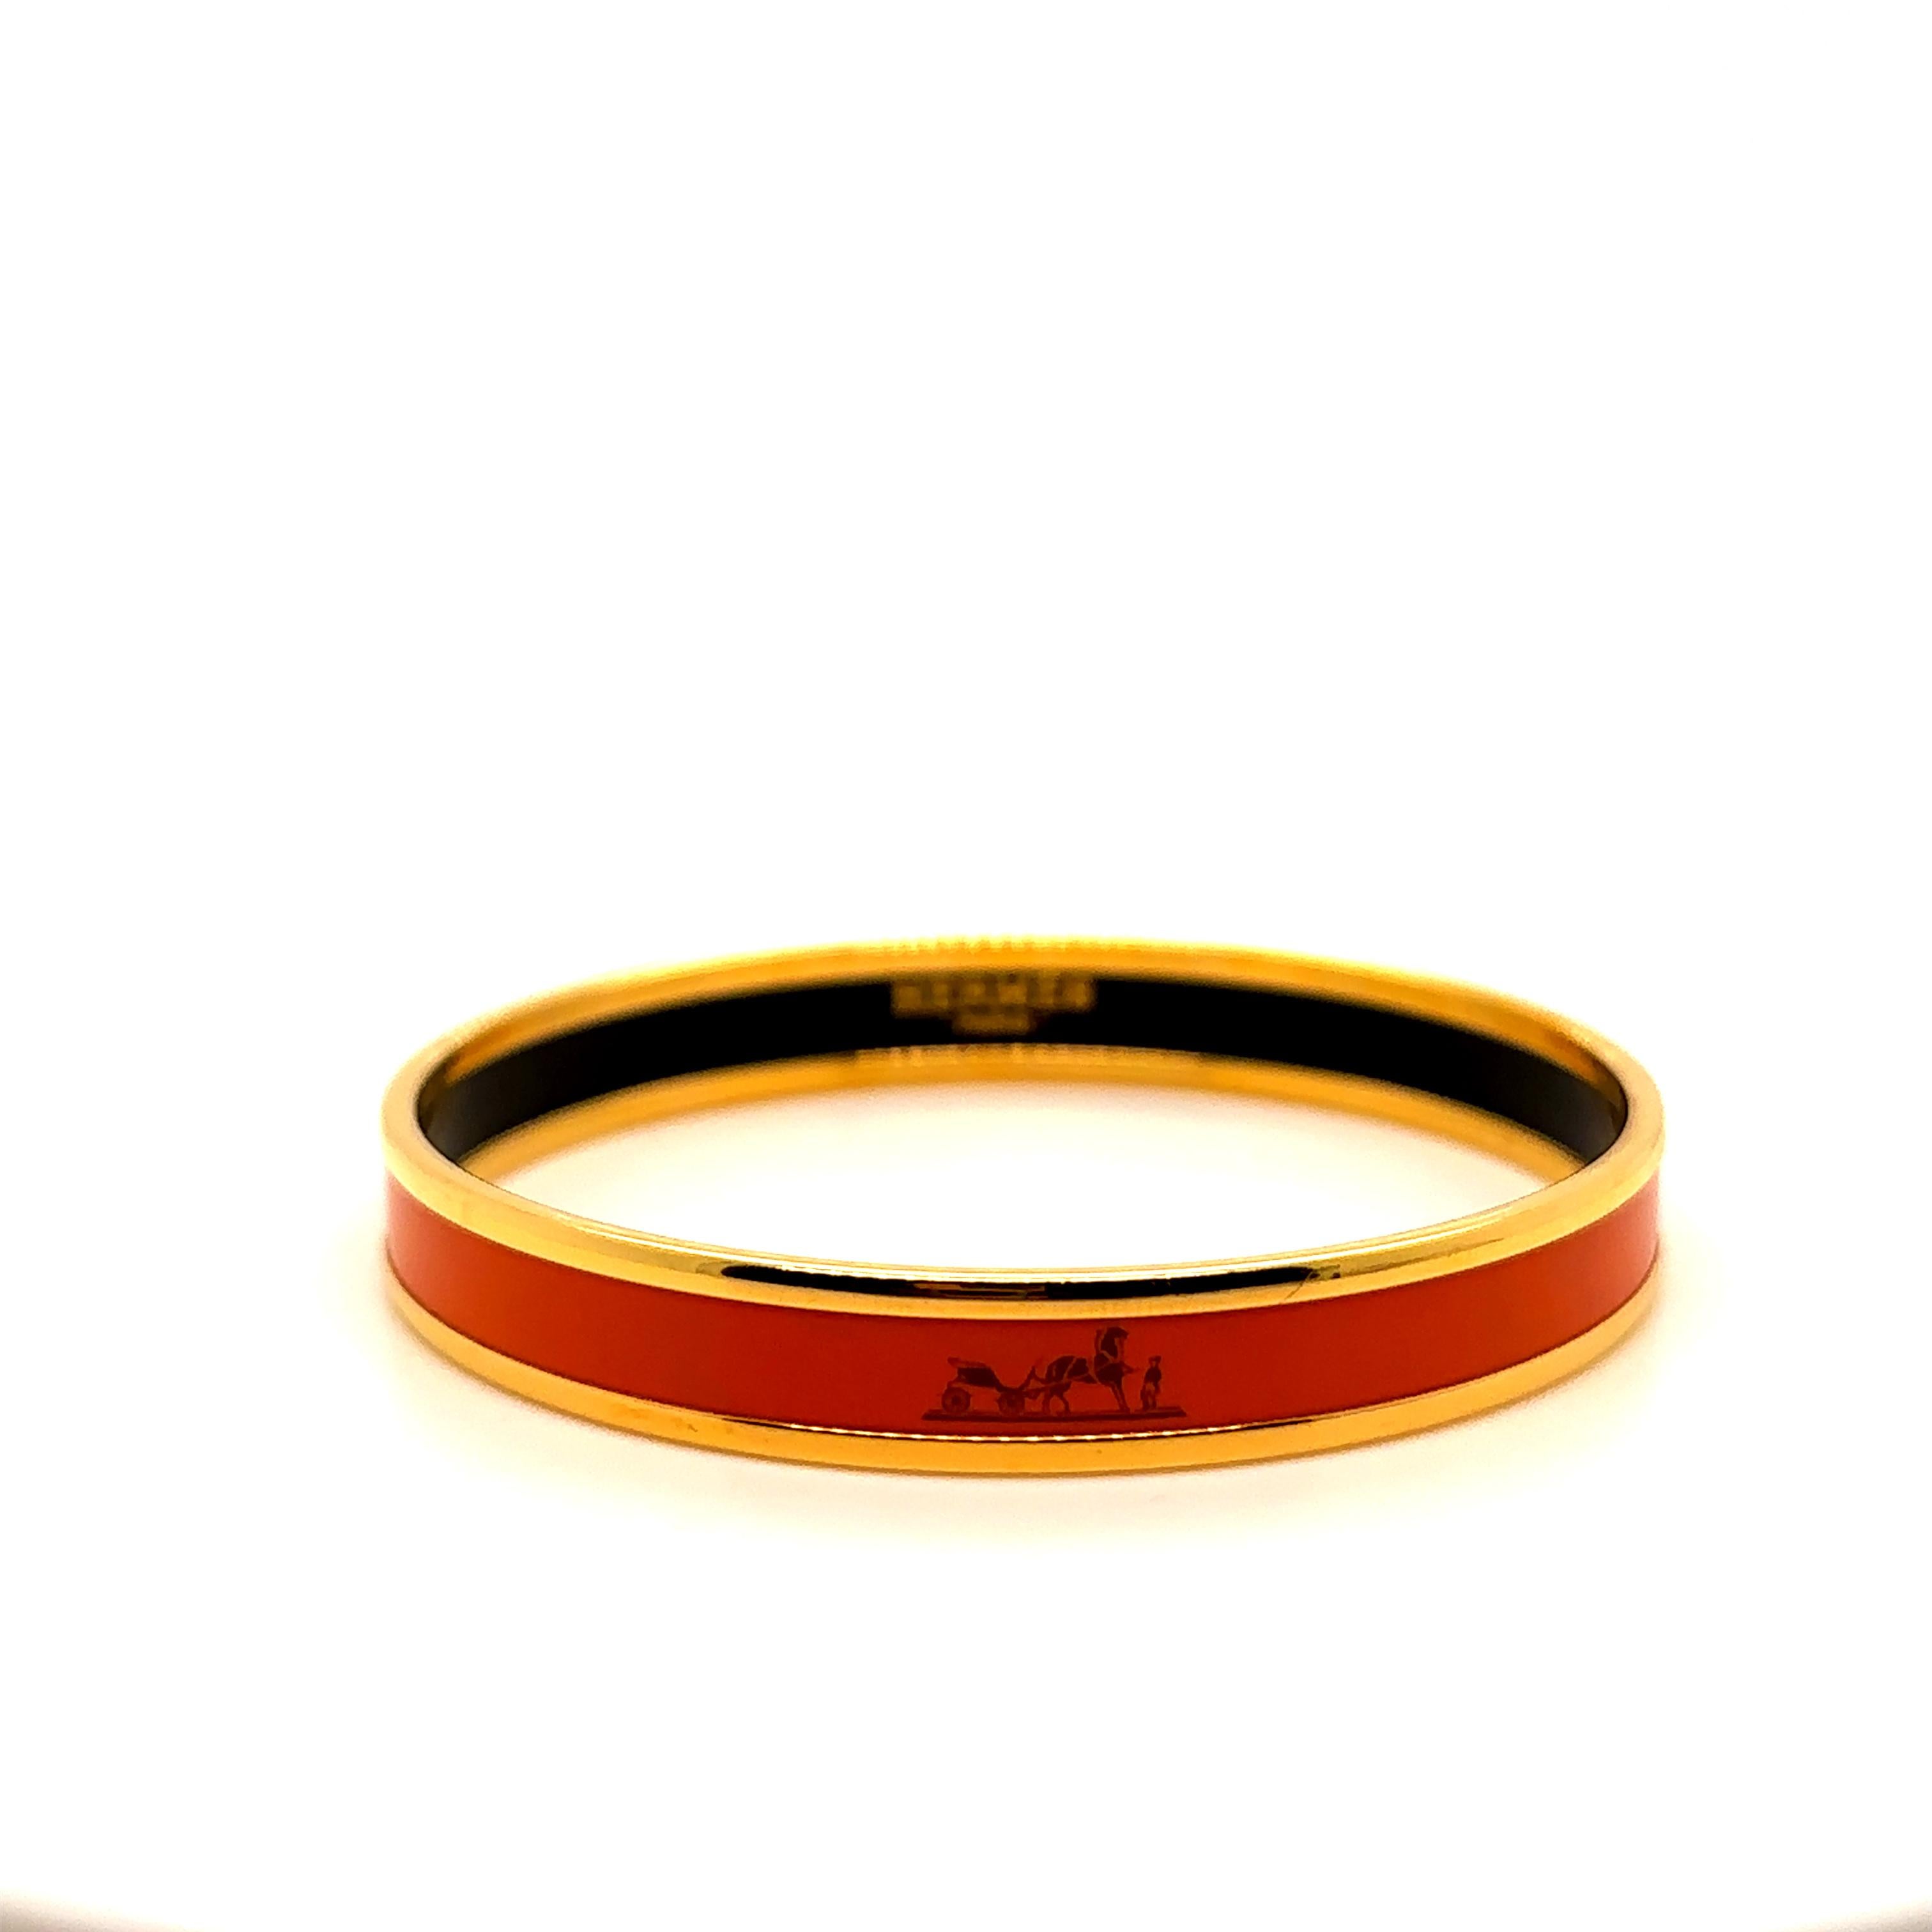  Unique features: 

A Hermes extra-narrow Uni bangle in enamel with gold-plated hardware.

Made in France

Interior diameter: 6.3 cm  Width: 5.6 mm

Metal: Gold Plated
Carat: N/A
Colour: N/A
Clarity:  N/A
Cut: N/A 
Weight: 19.5g
Engravings/Markings: